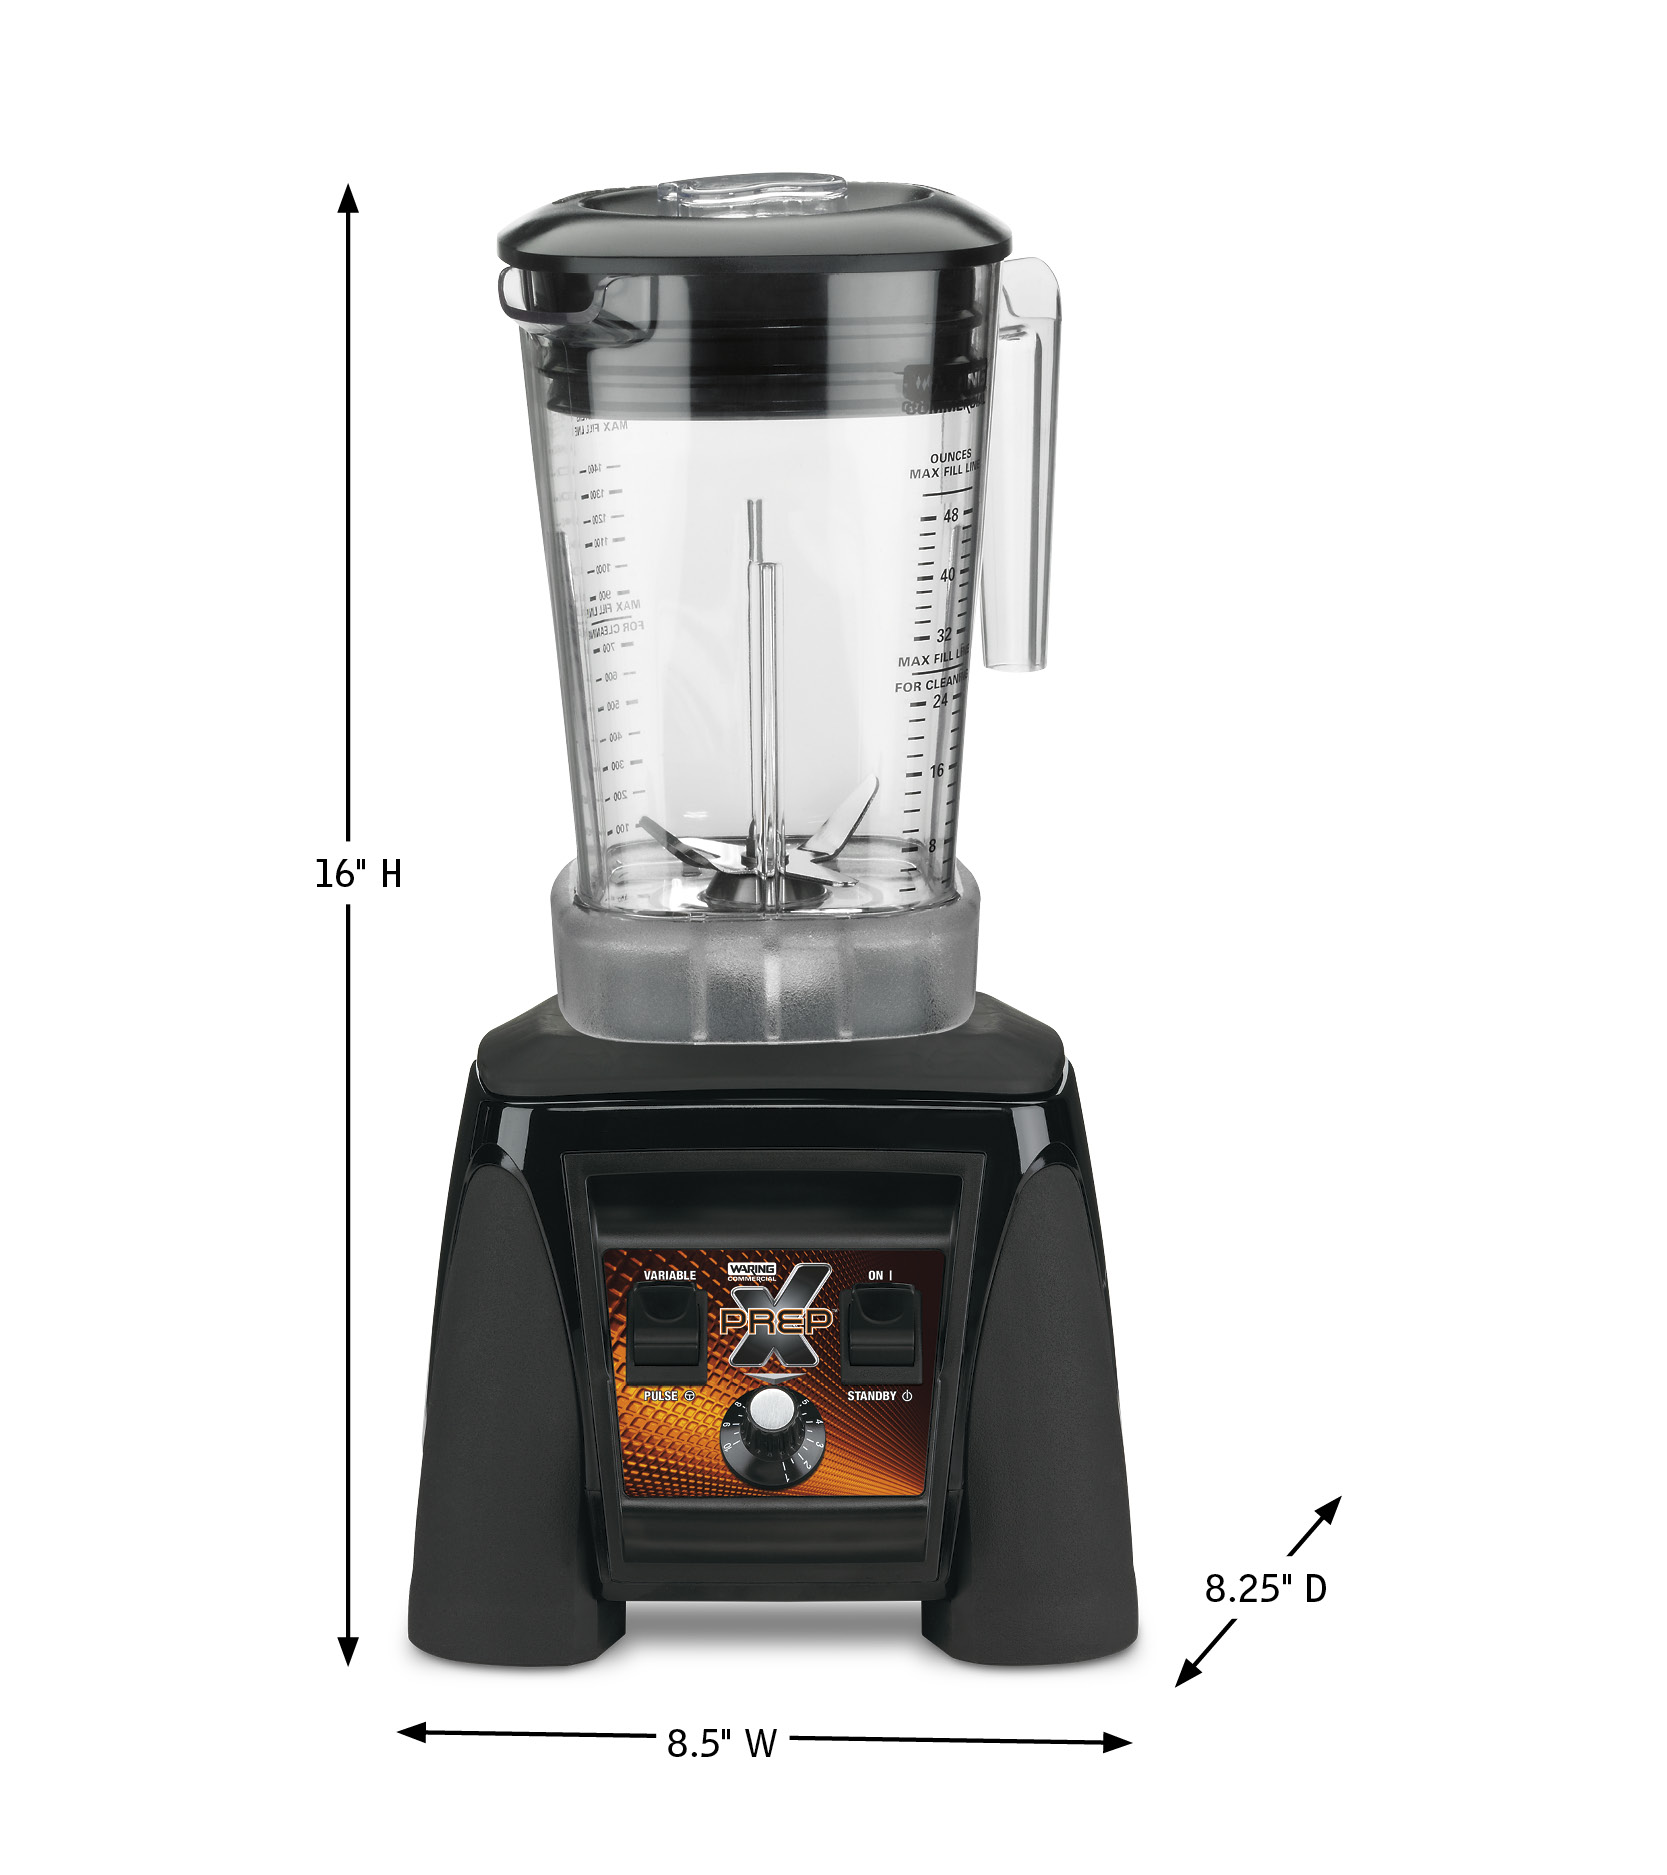 https://www.waringcommercialproducts.com/files/products/mx1200xtxp-waring-blender-spec.jpg